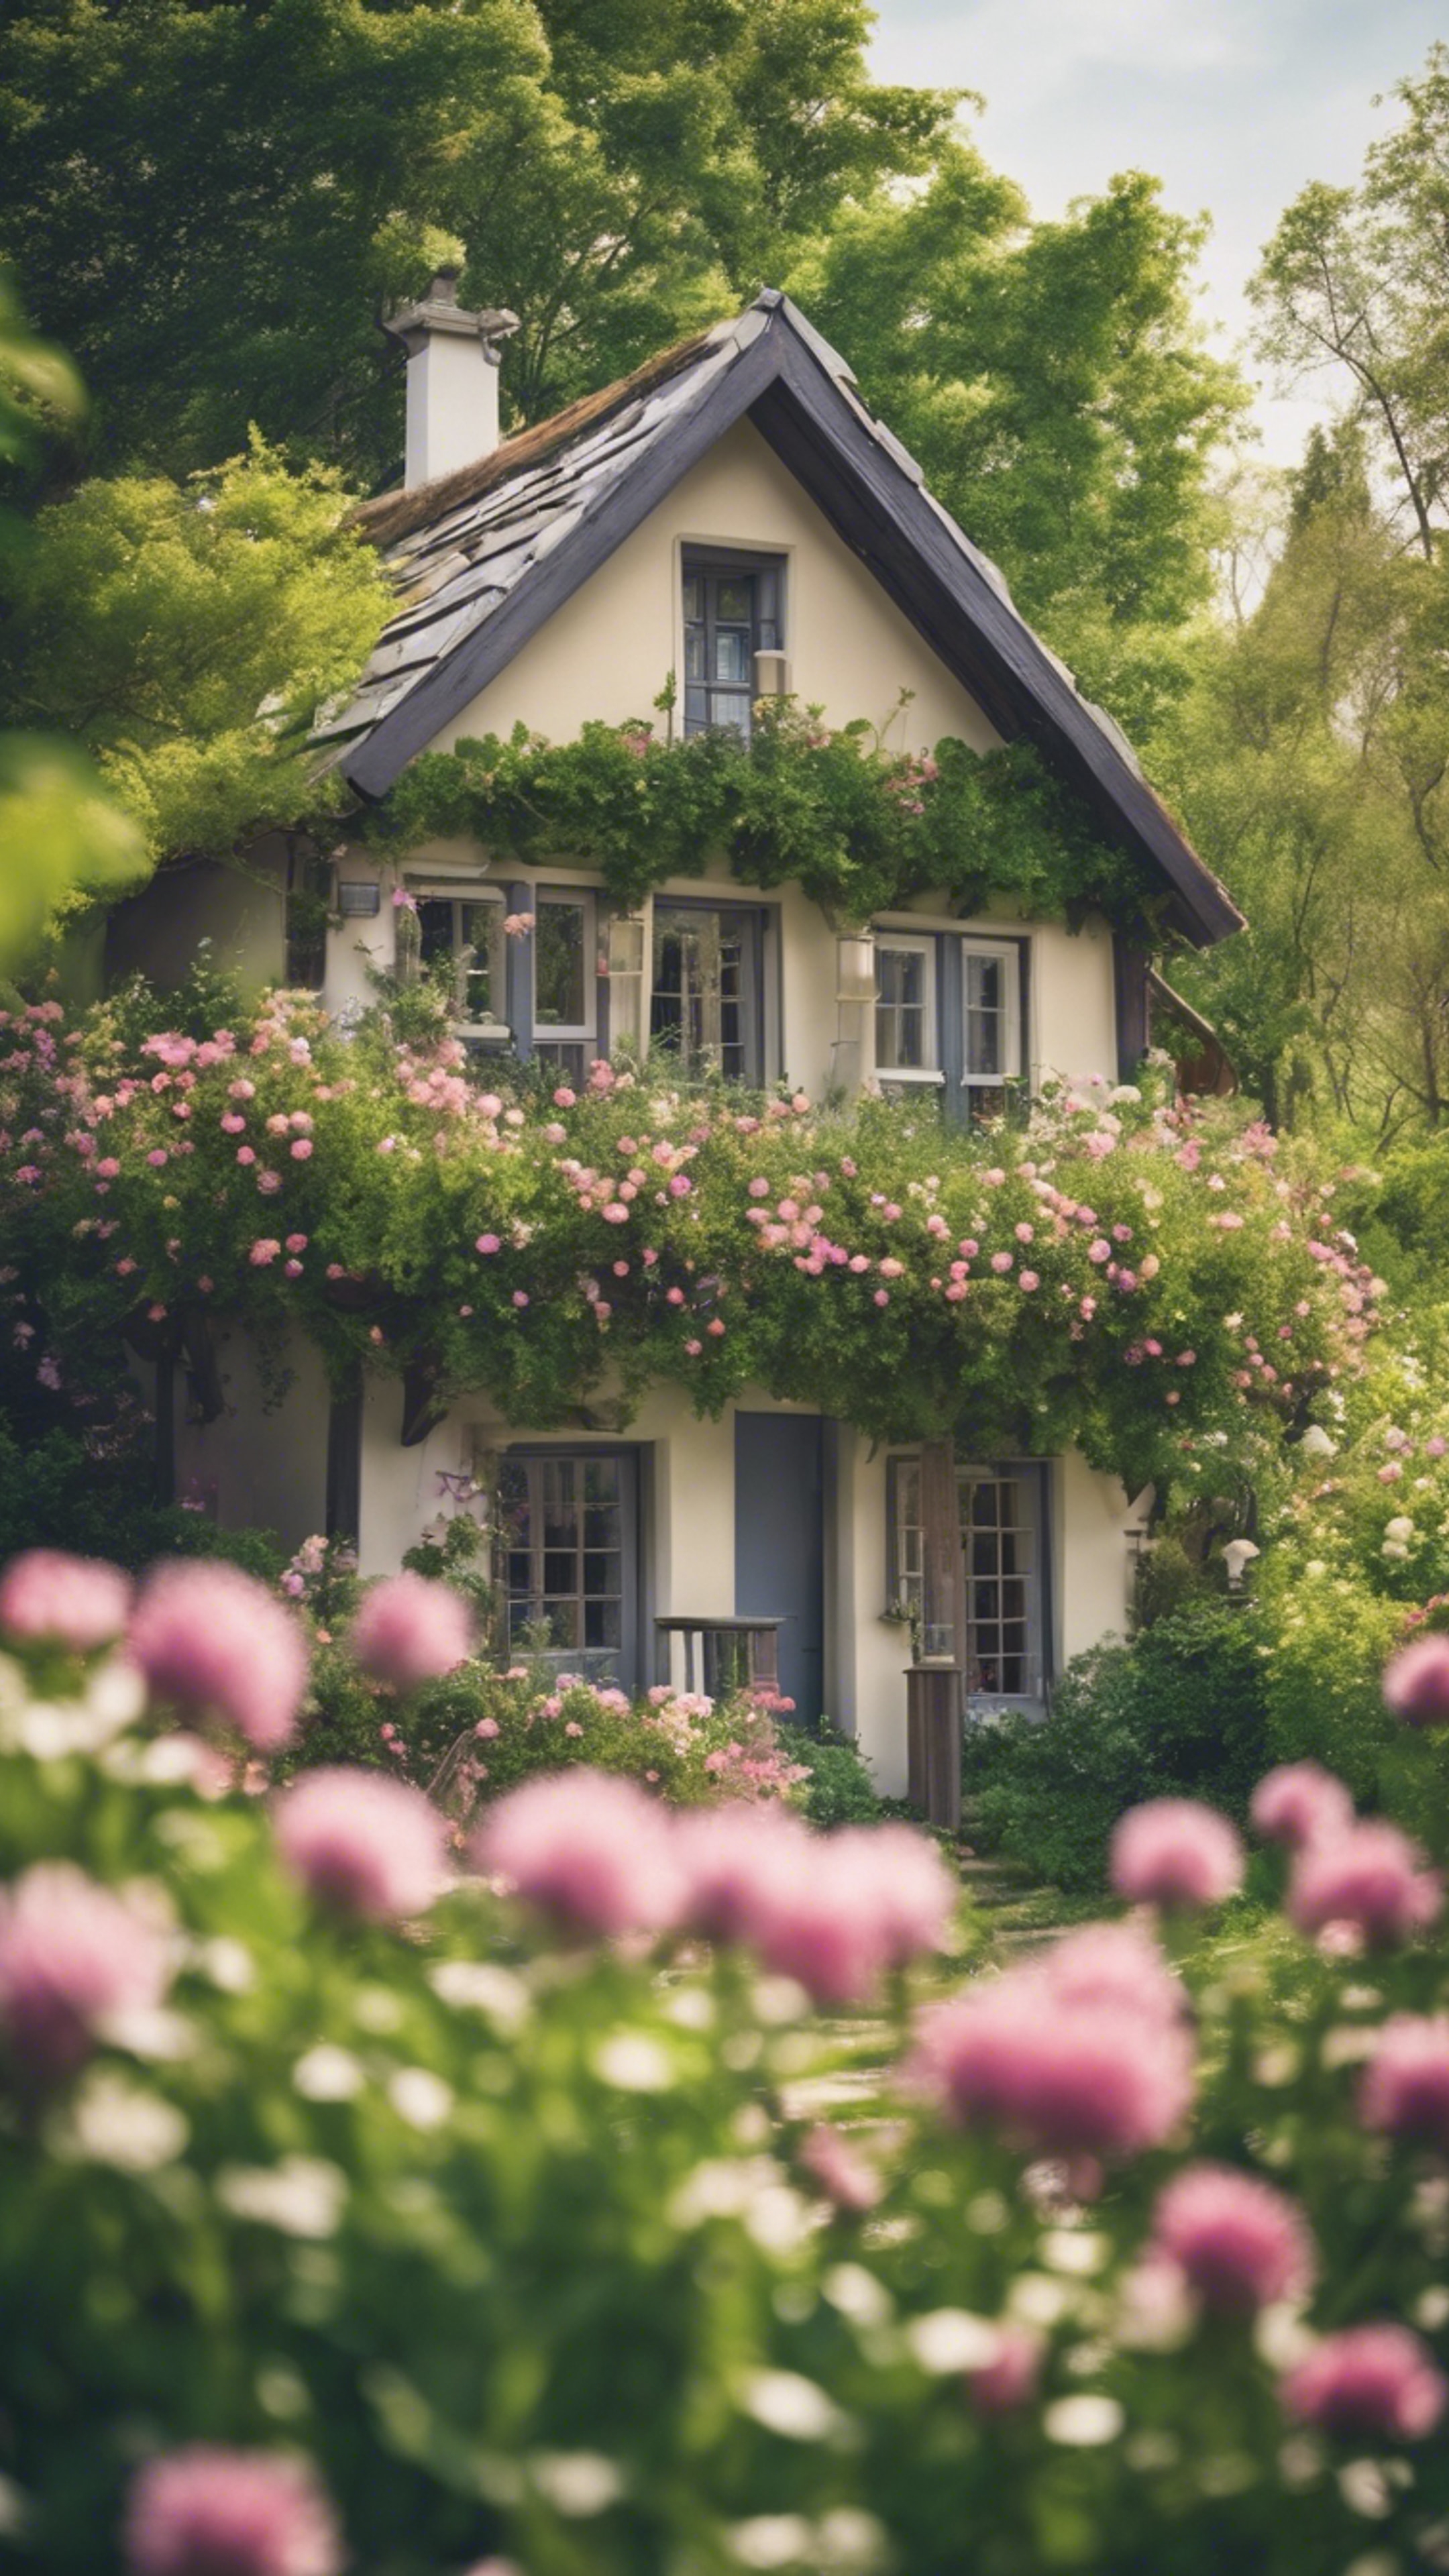 A picturesque scene of a quaint little cottage surrounded by a burst of spring flowers and new green foliage.壁紙[ad9cdb560dce44d082cc]